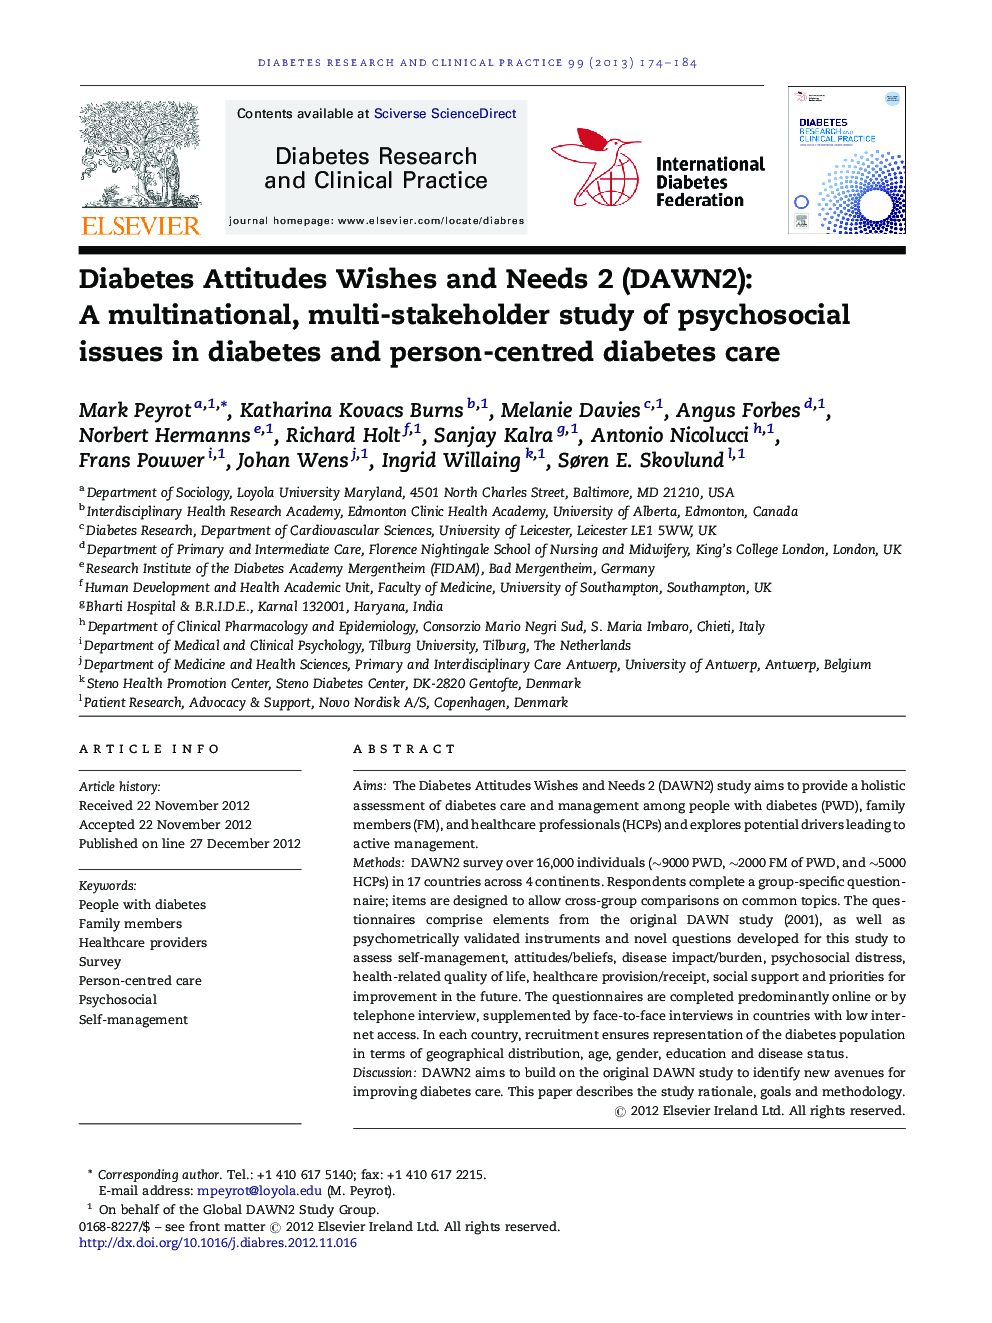 Diabetes Attitudes Wishes and Needs 2 (DAWN2): A multinational, multi-stakeholder study of psychosocial issues in diabetes and person-centred diabetes care